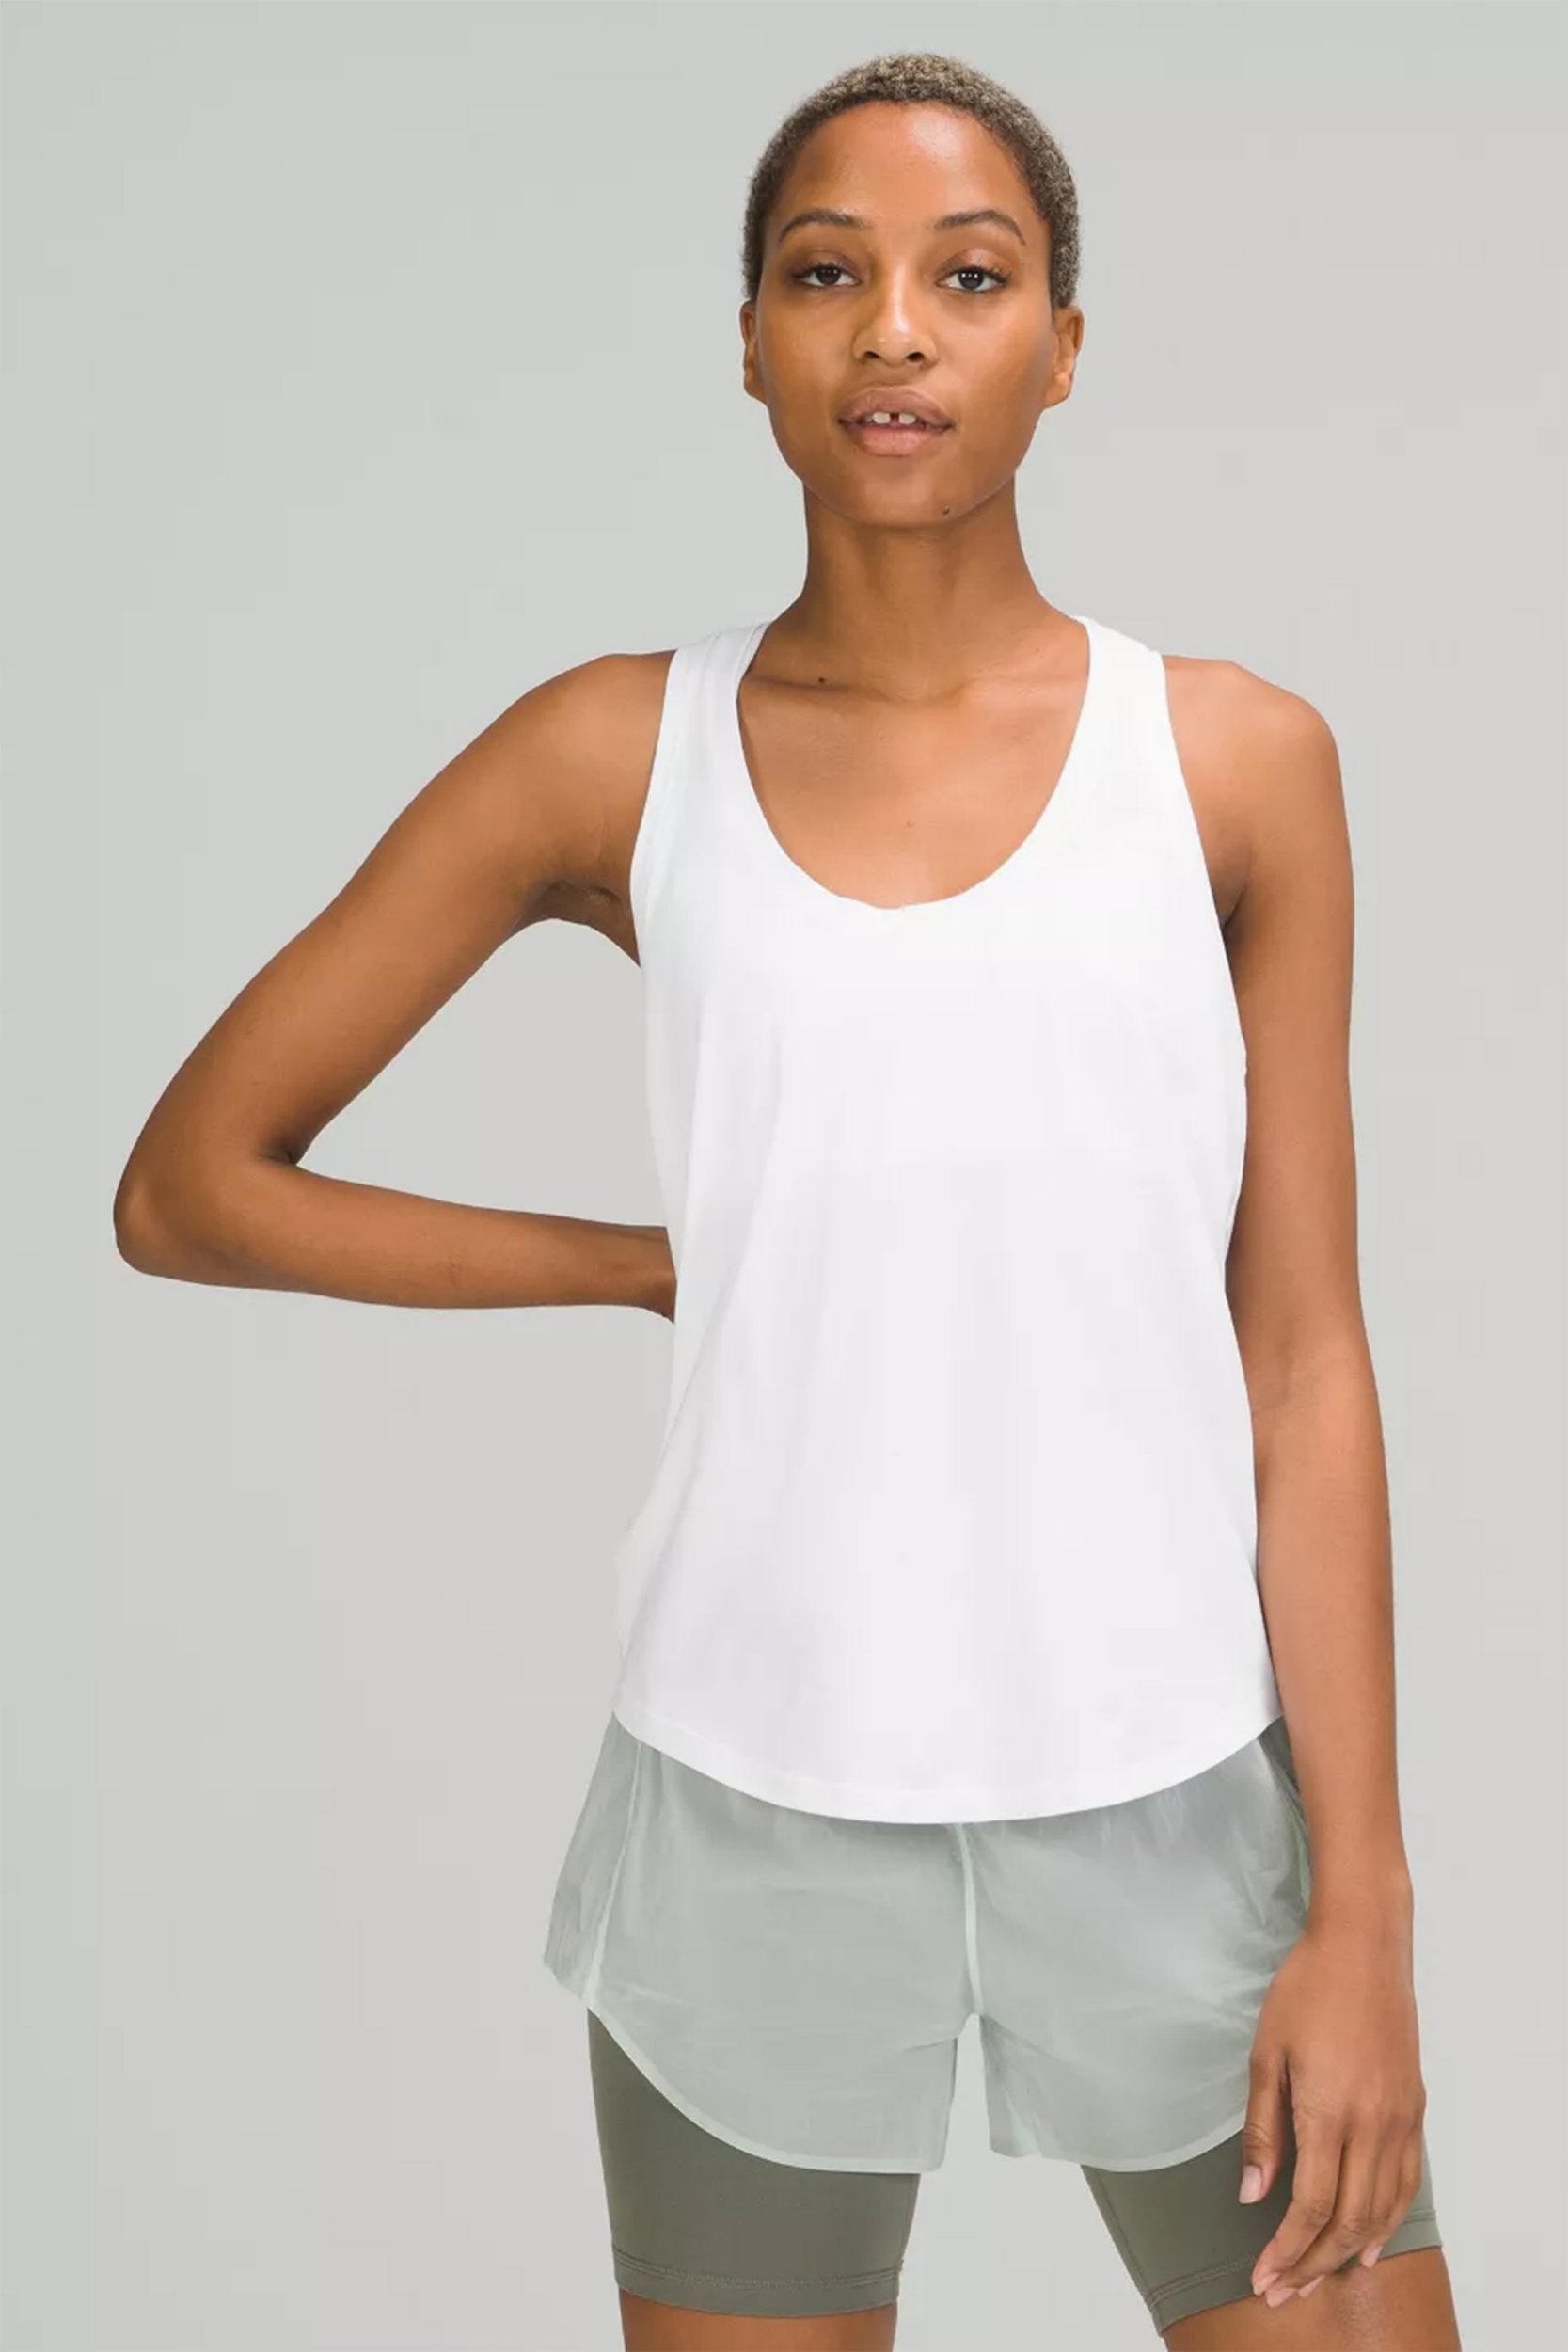 What to wear under a shirt, What bra to wear with white top